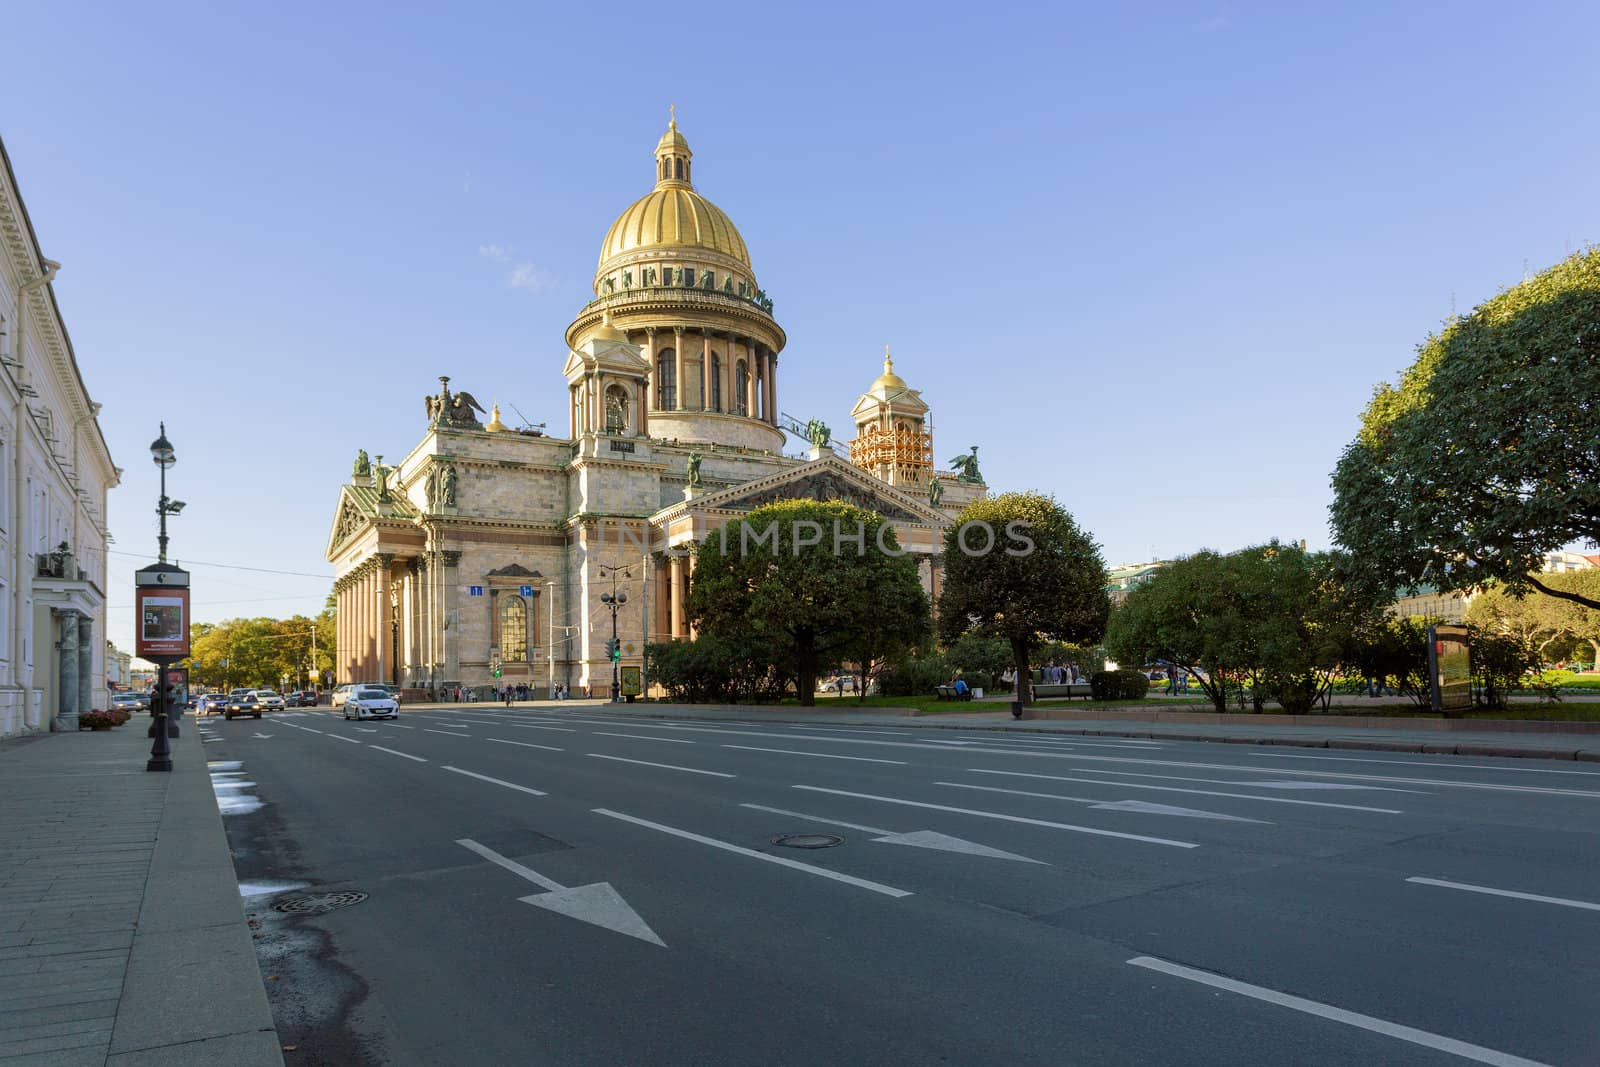 Isaac Cathedral in St. Petersburg by Roka